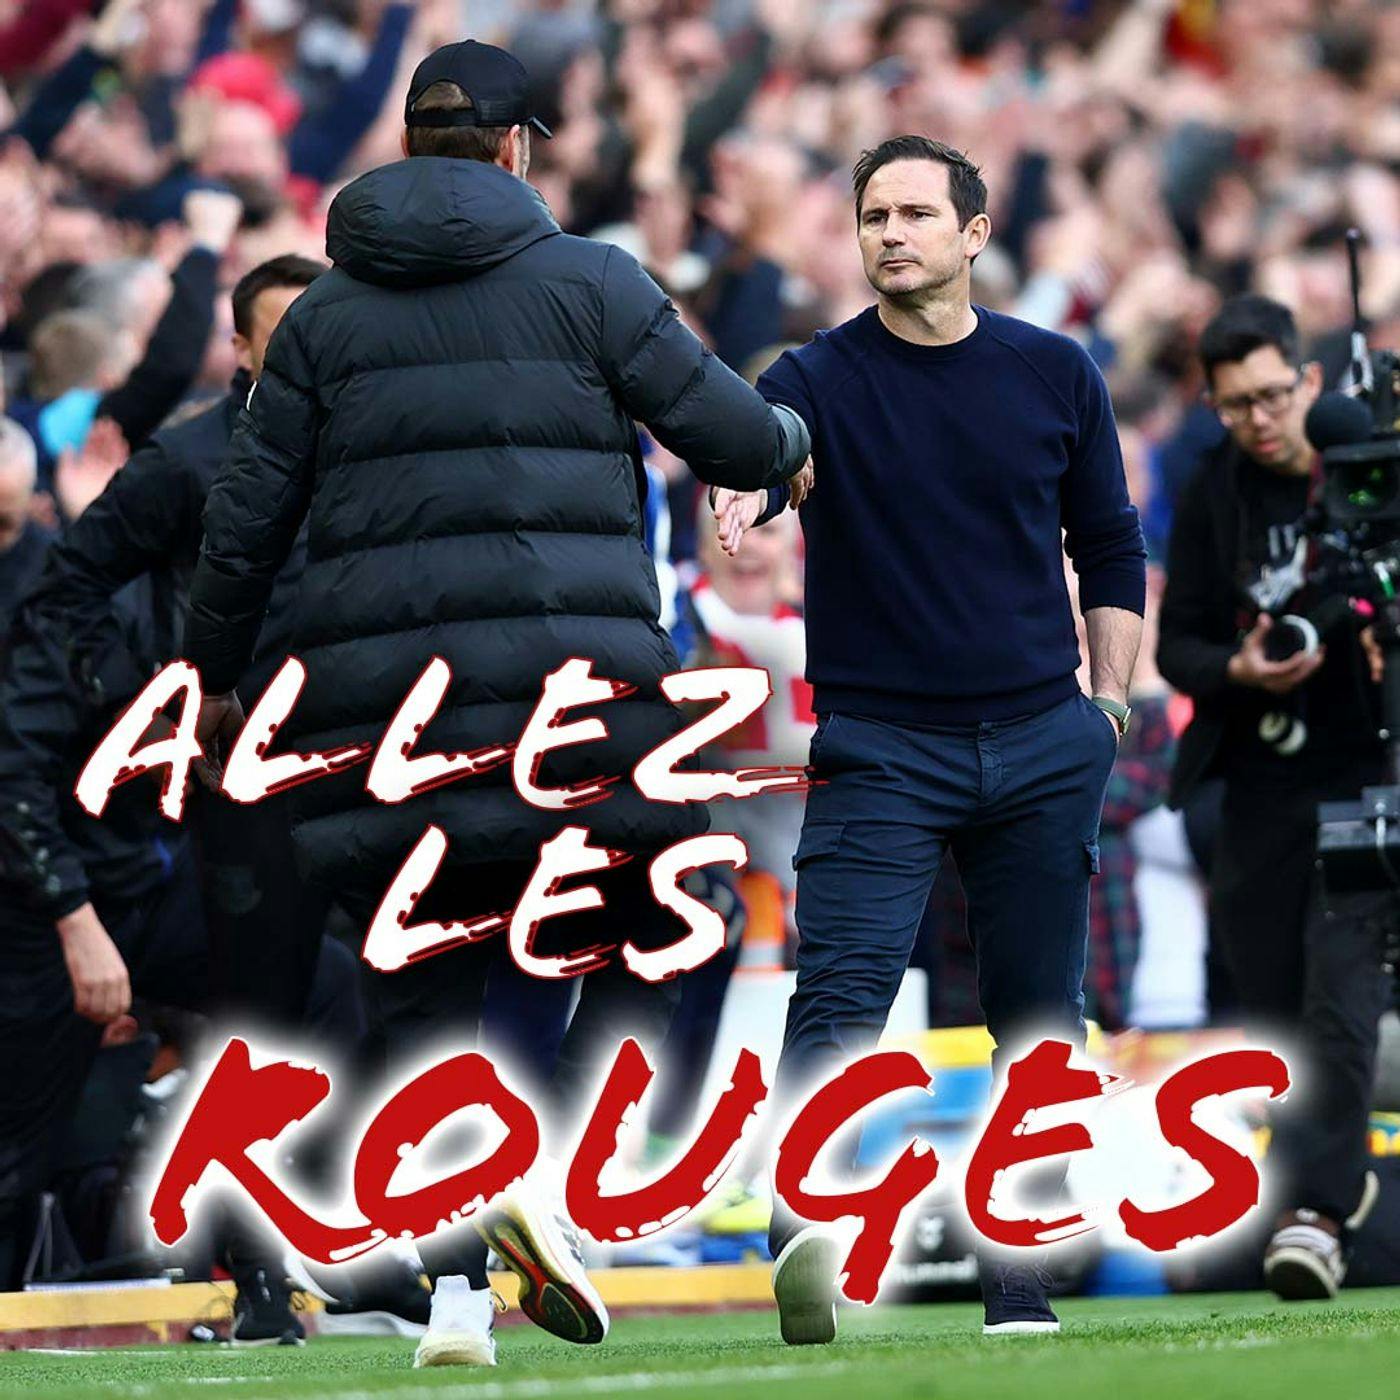 Allez Les Rouges: Merseyside Derby on Horizons, Initial Season Impressions & Transfer Window Overview